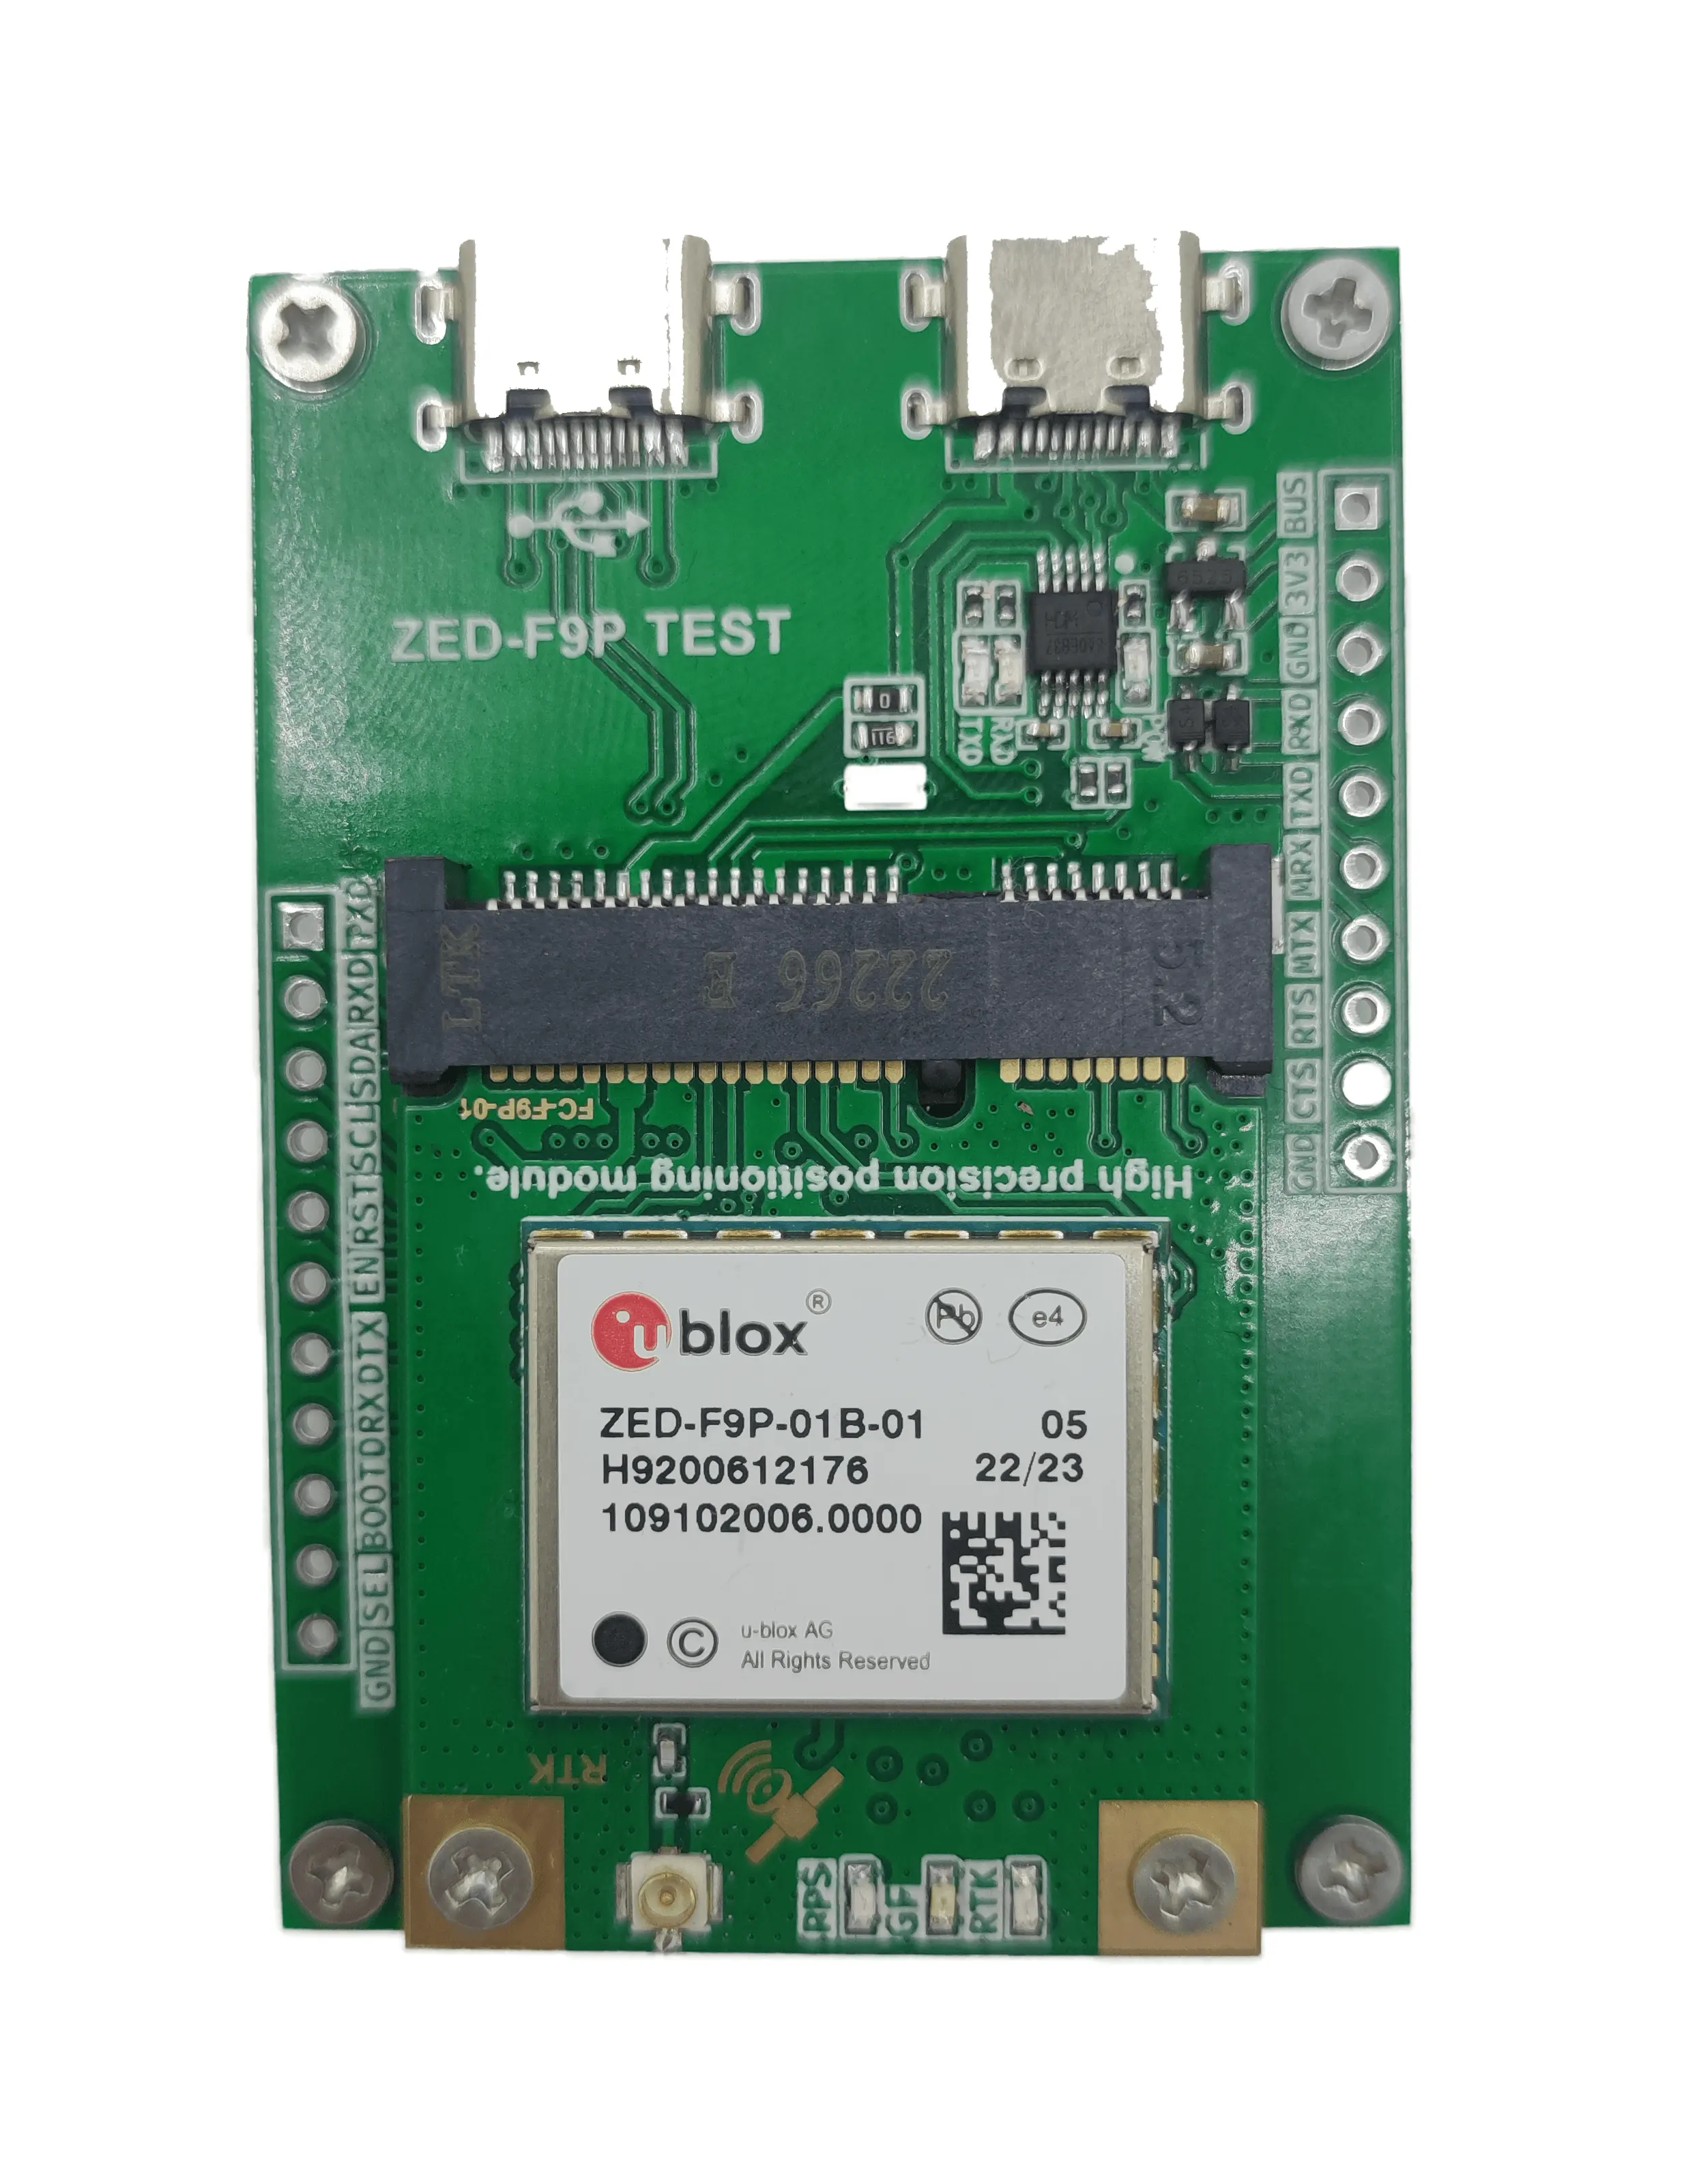 Designed with the ZED-F9P F9 module the RTK high-precision GNSS receiver can be used as a base station and rove TOPGNSS